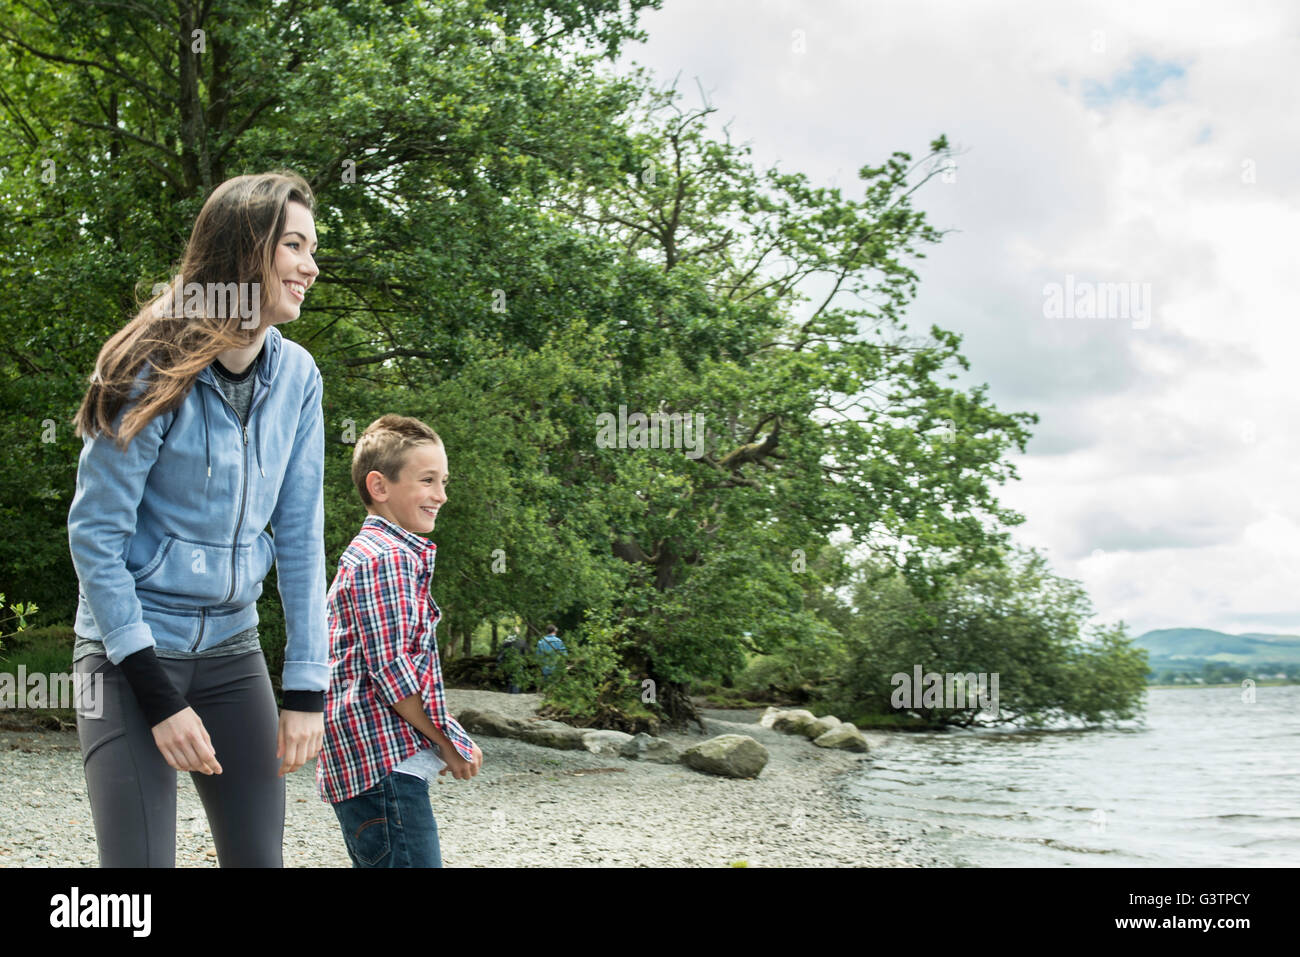 A girl and a boy playing on the shore beside Bala Lake in Wales. Stock Photo